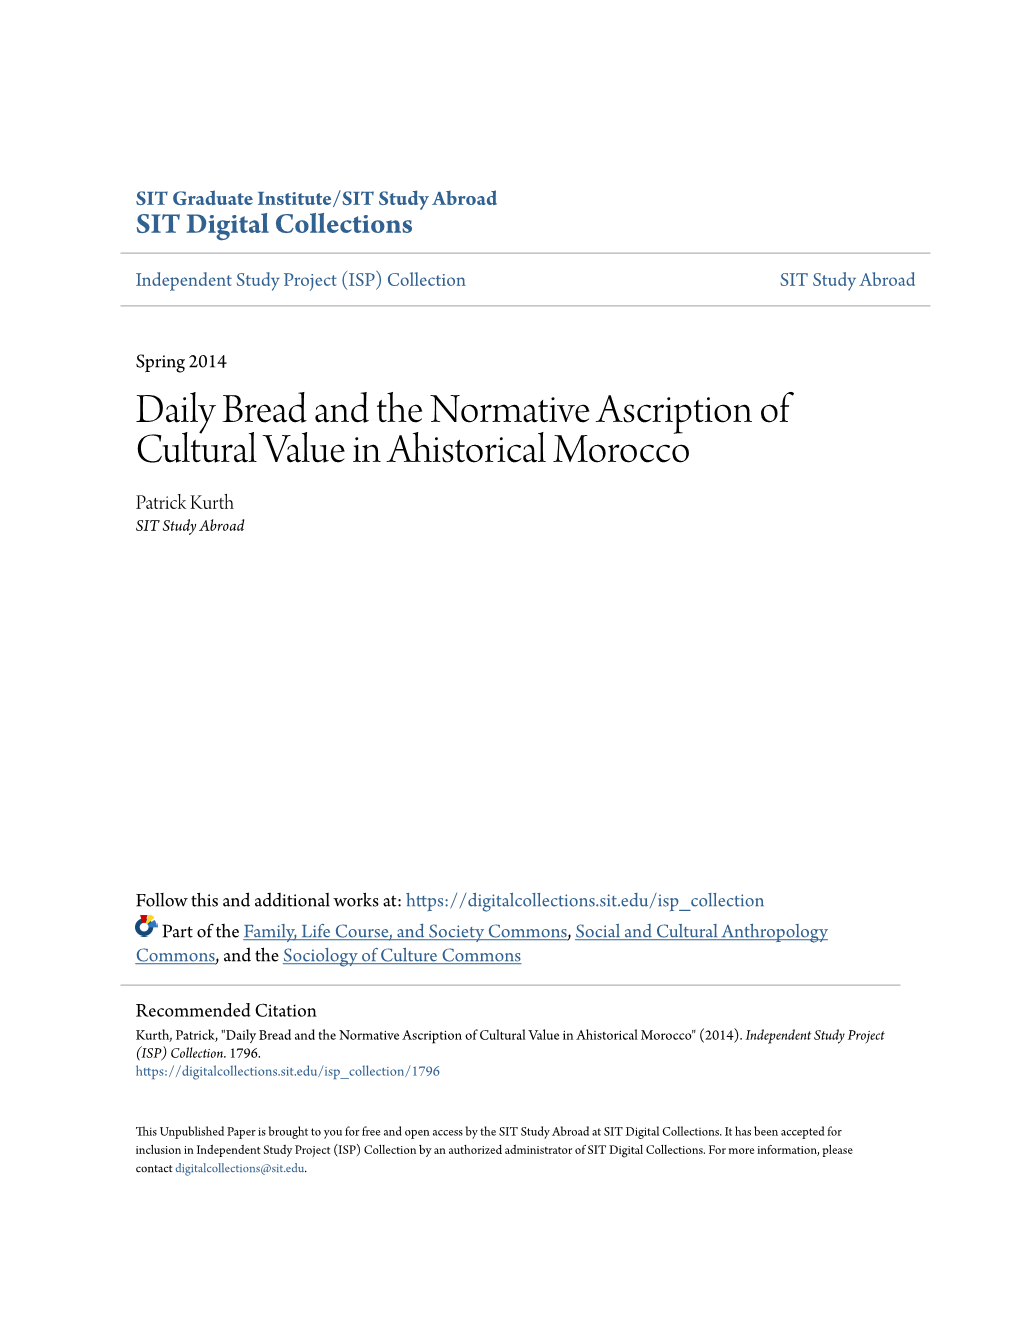 Daily Bread and the Normative Ascription of Cultural Value in Ahistorical Morocco Patrick Kurth SIT Study Abroad